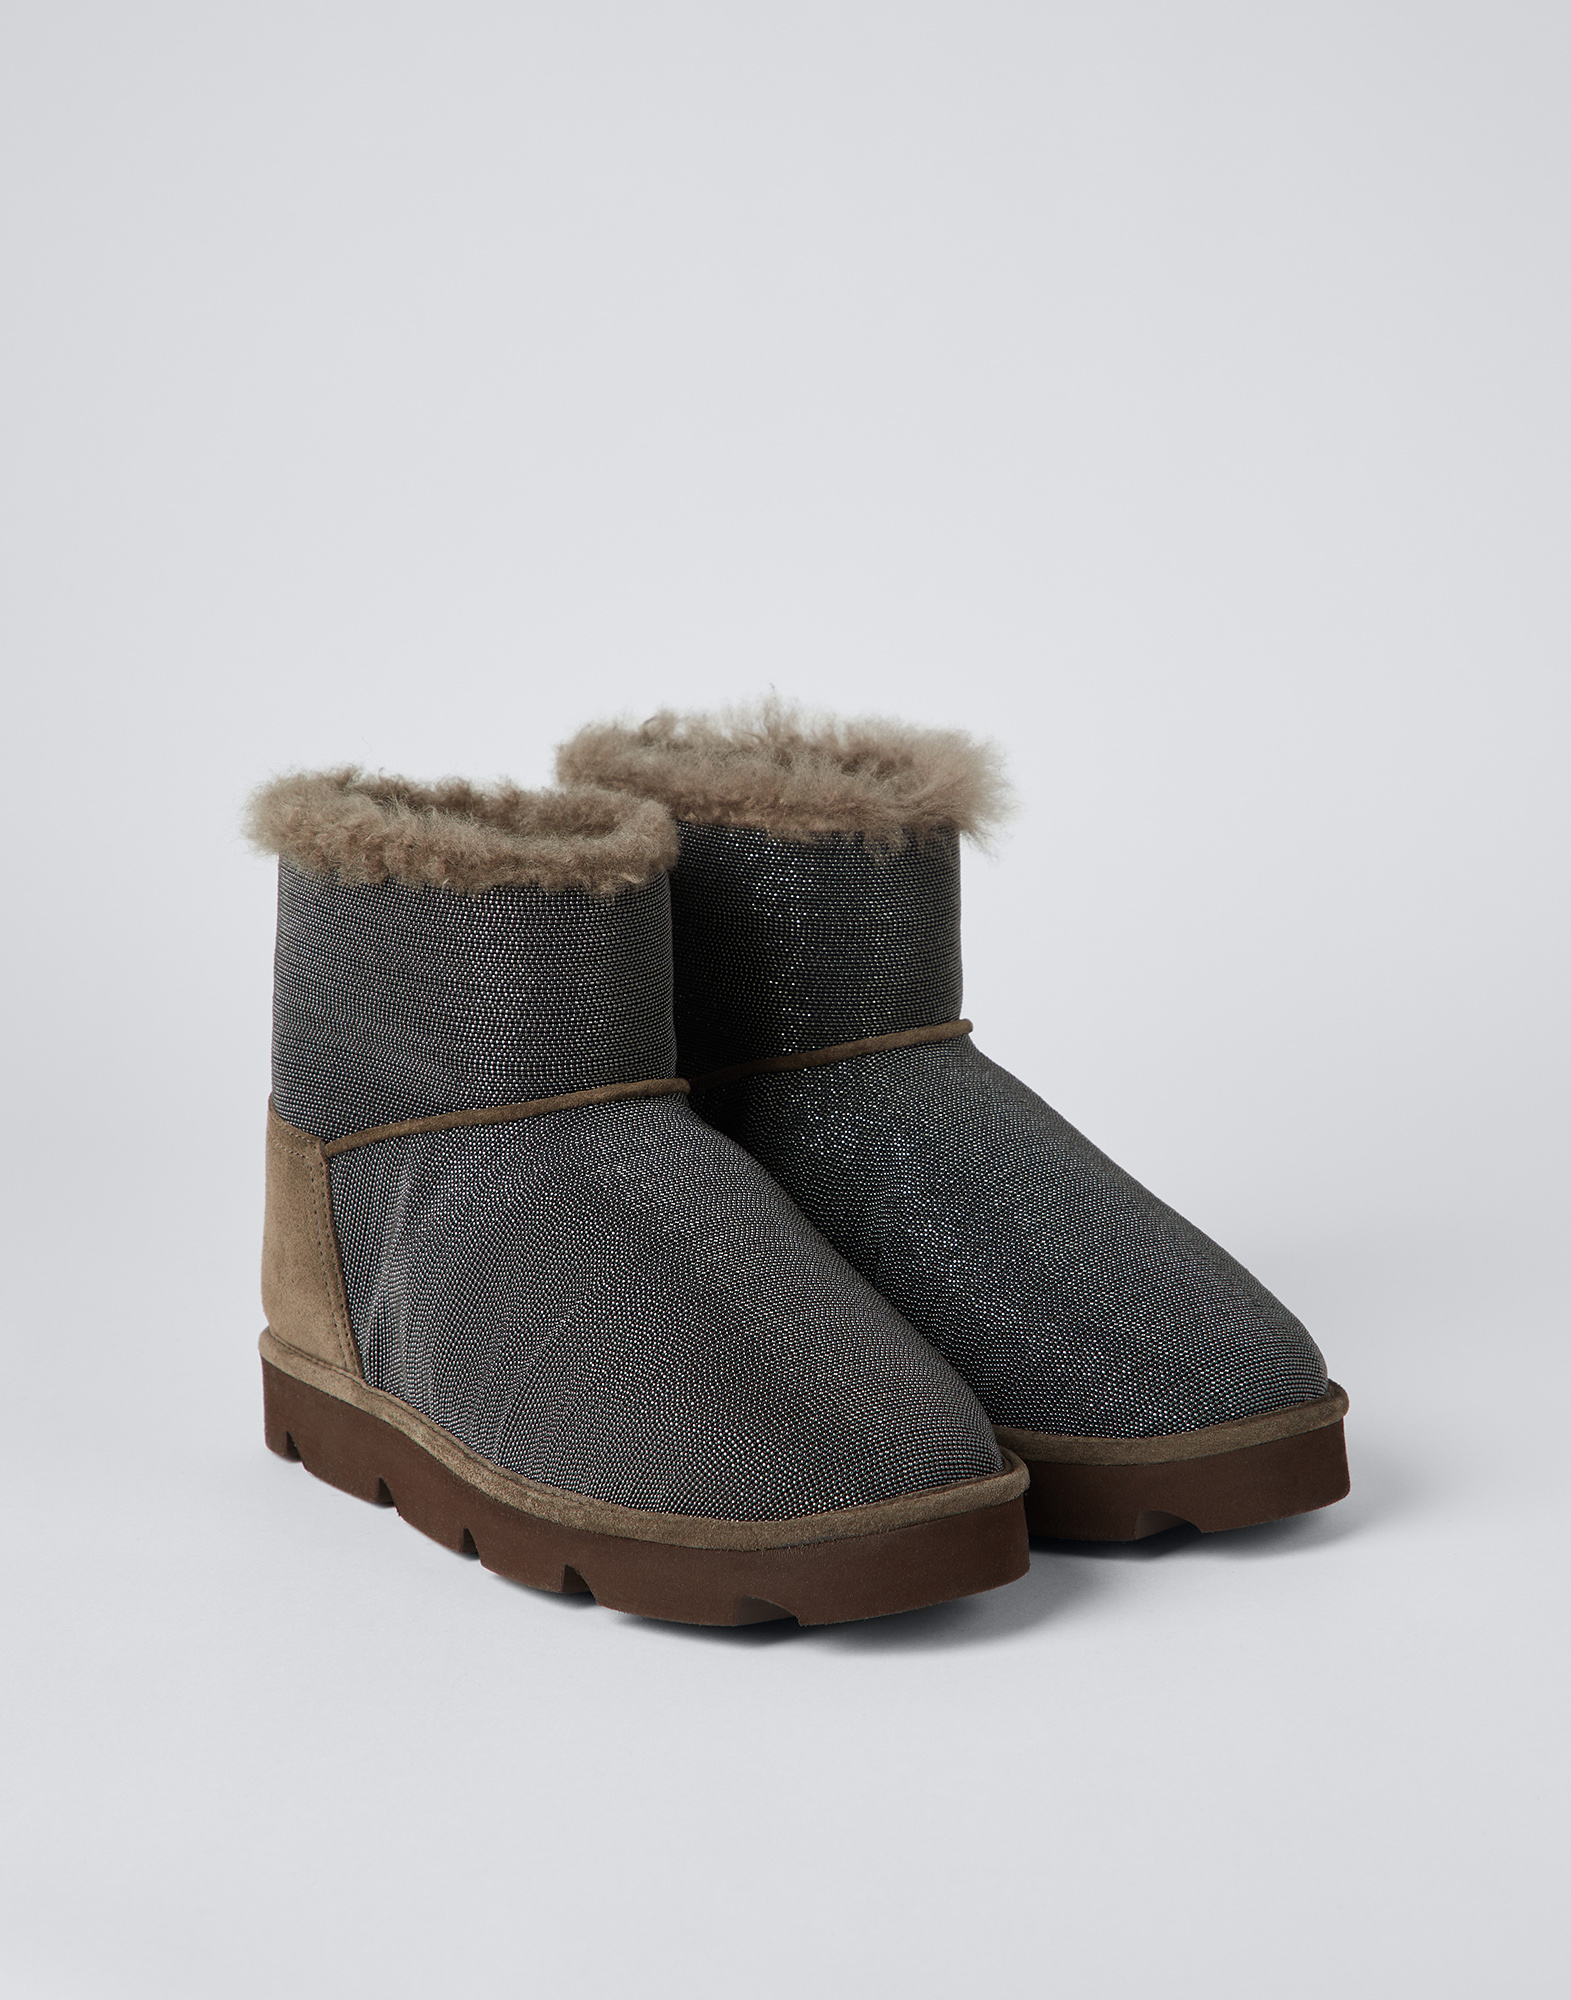 Boots with shearling lining